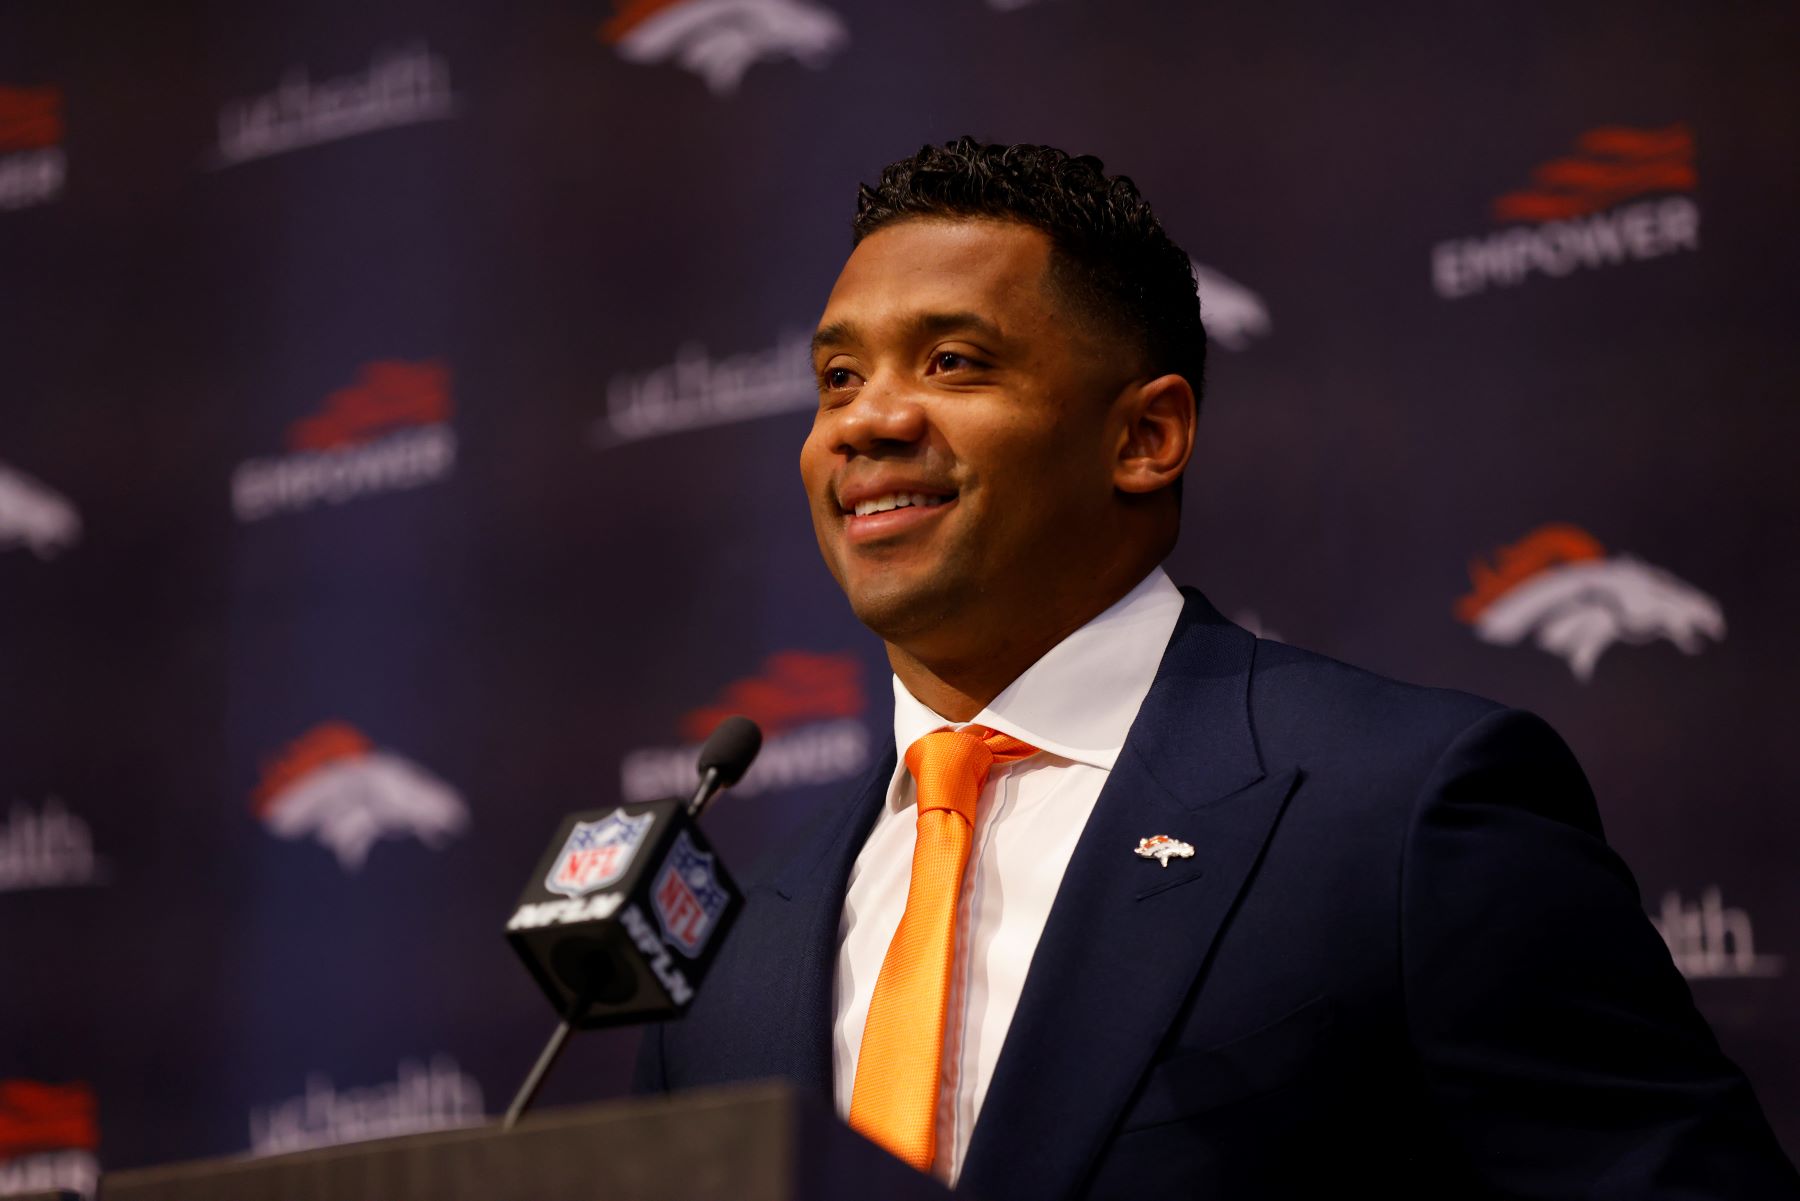 Quarterback Russell Wilson being introduced as #3 for the Denver Broncos NFL team